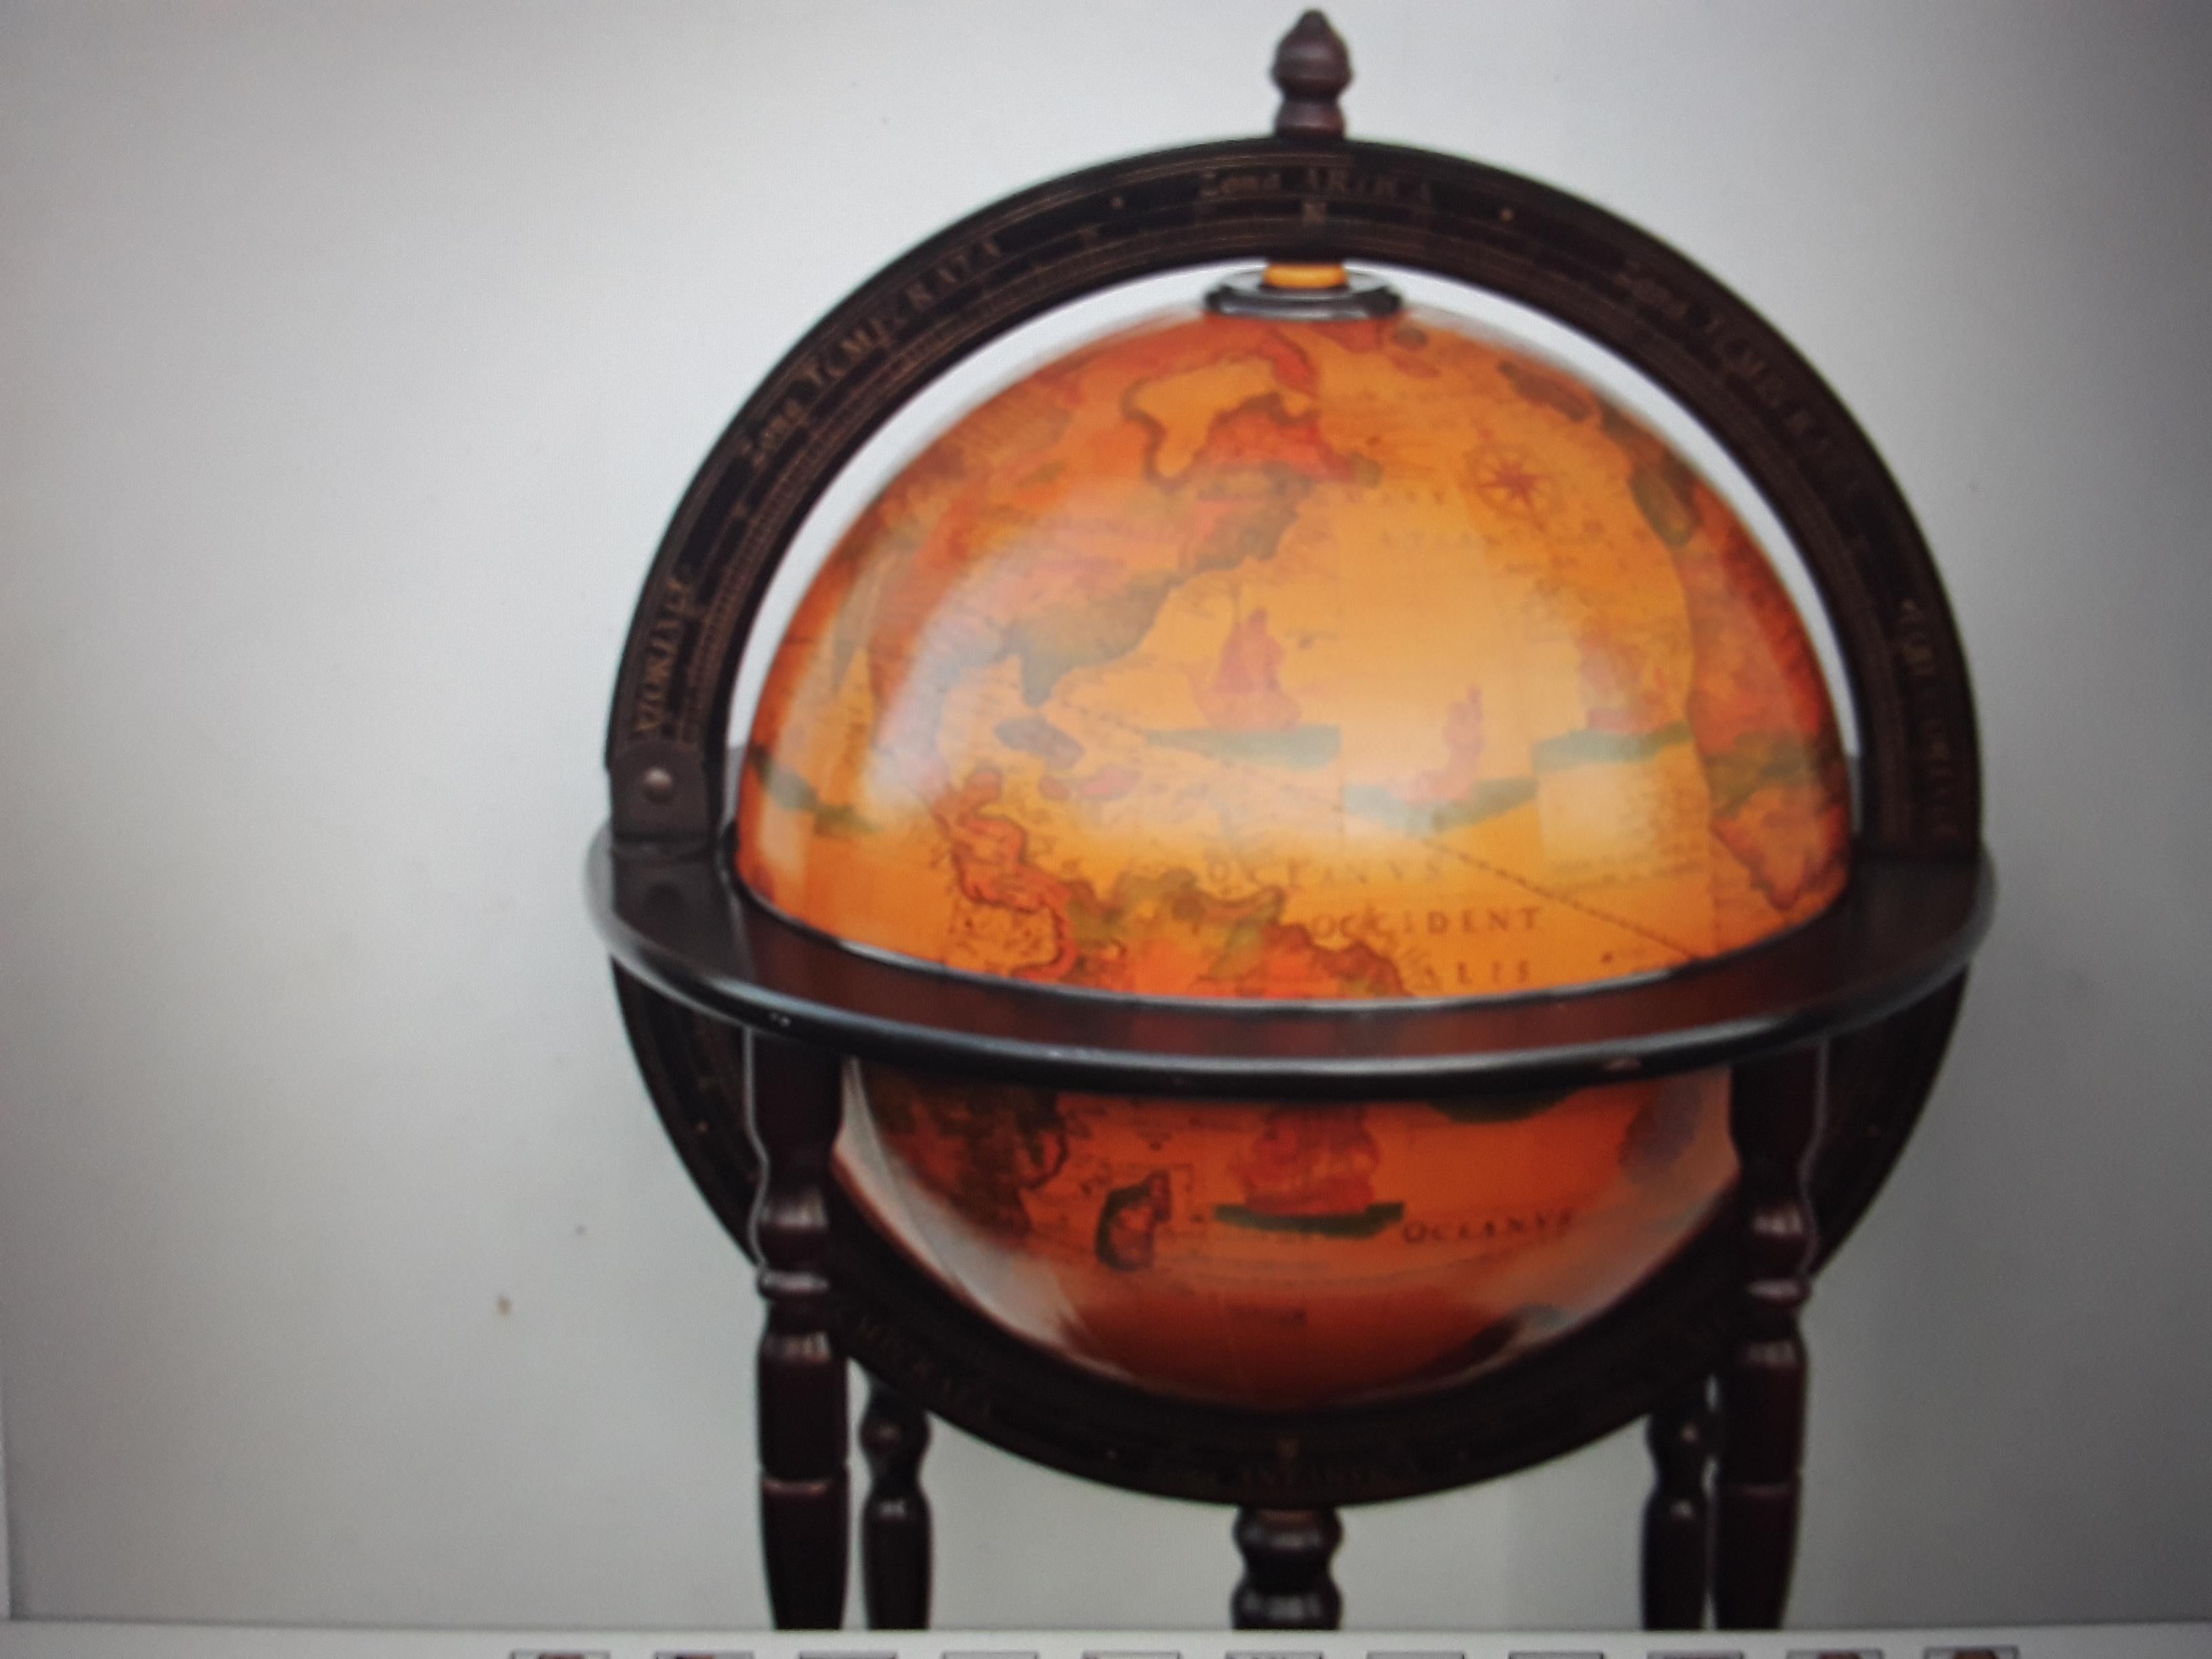 1970's Mid Century Modern World Globe Dry Bar. Top of globe opens to reveal interior storage. Beautifully carved wood base. Please look at pictures closely as they are part of the description.